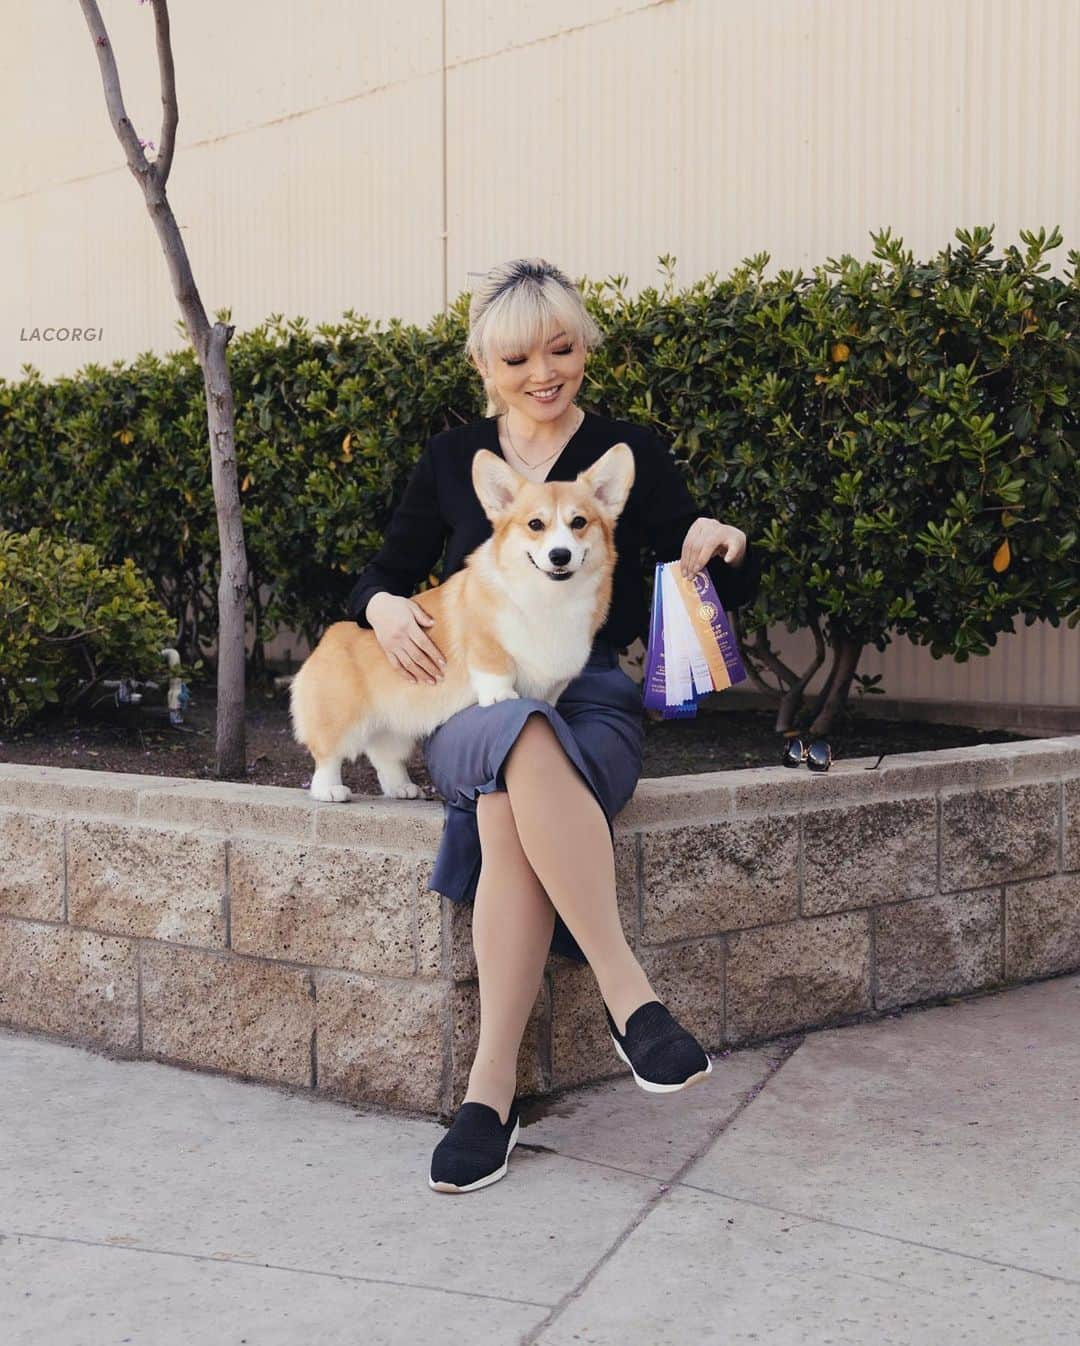 Geordi La Corgiのインスタグラム：「Agatha and I had an incredible time at the Bakersfield show! This was just our second weekend out together, and we had a clean sweep, going ✨Winners Bitch✨ all 4 days. Plus, she was Best Opposite on Friday AND Best of Breed over multiple champions on Saturday. 🏆 Over just 4 days, she earned 12 CH points (you need 15 points total for an AKC championship). Swipe to see the ridiculous number of ribbons she earned – GOOD GIRL AGGY!   Special thanks to our friends Bill and Susan for helping show her during Best of Breed while I handled Scotty! It really takes a village and I'm so thankful to have such a supportive community.」